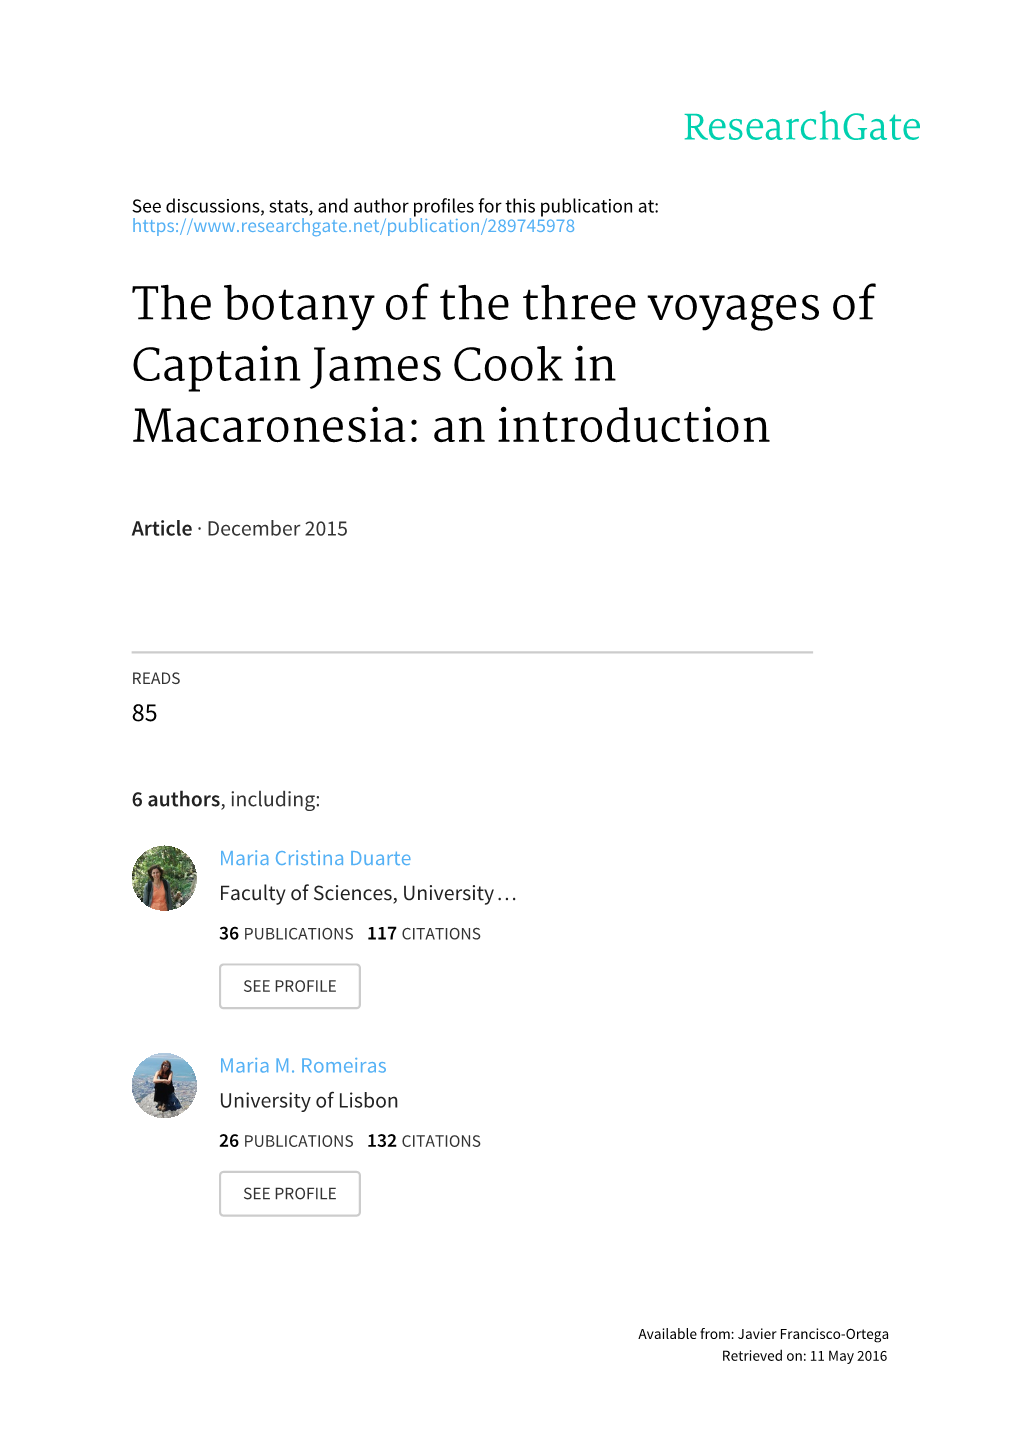 The Botany of the Three Voyages of Captain James Cook in Macaronesia: an Introduction